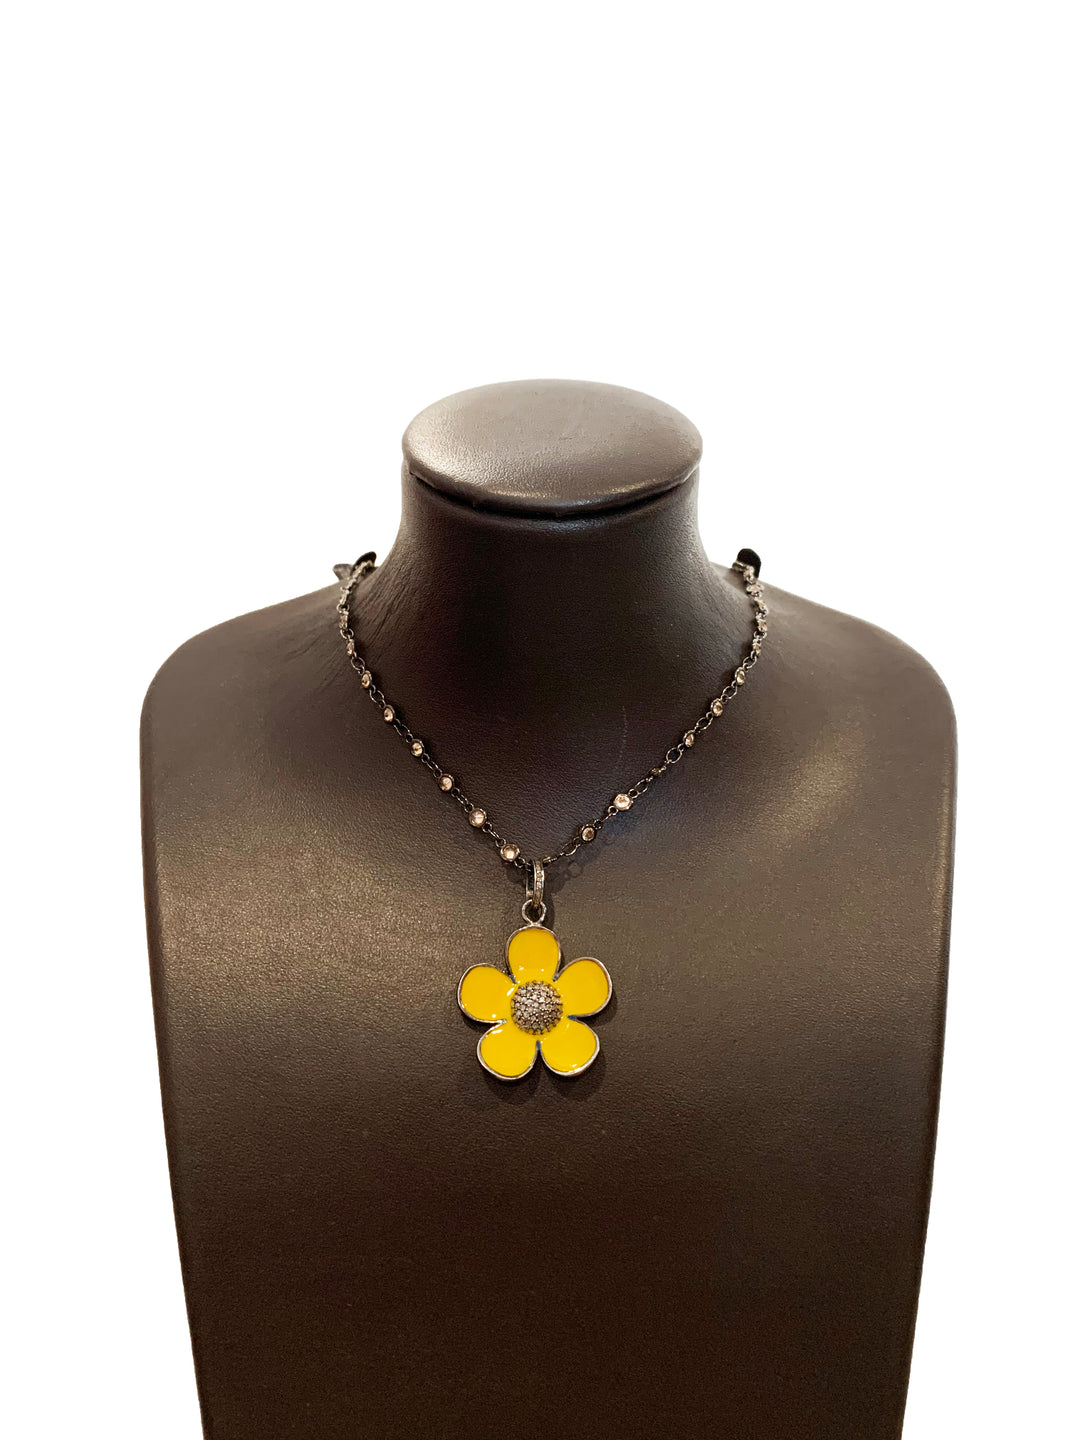 Enamel Daisy on Champagne Chain - Kingfisher Road - Online Boutique